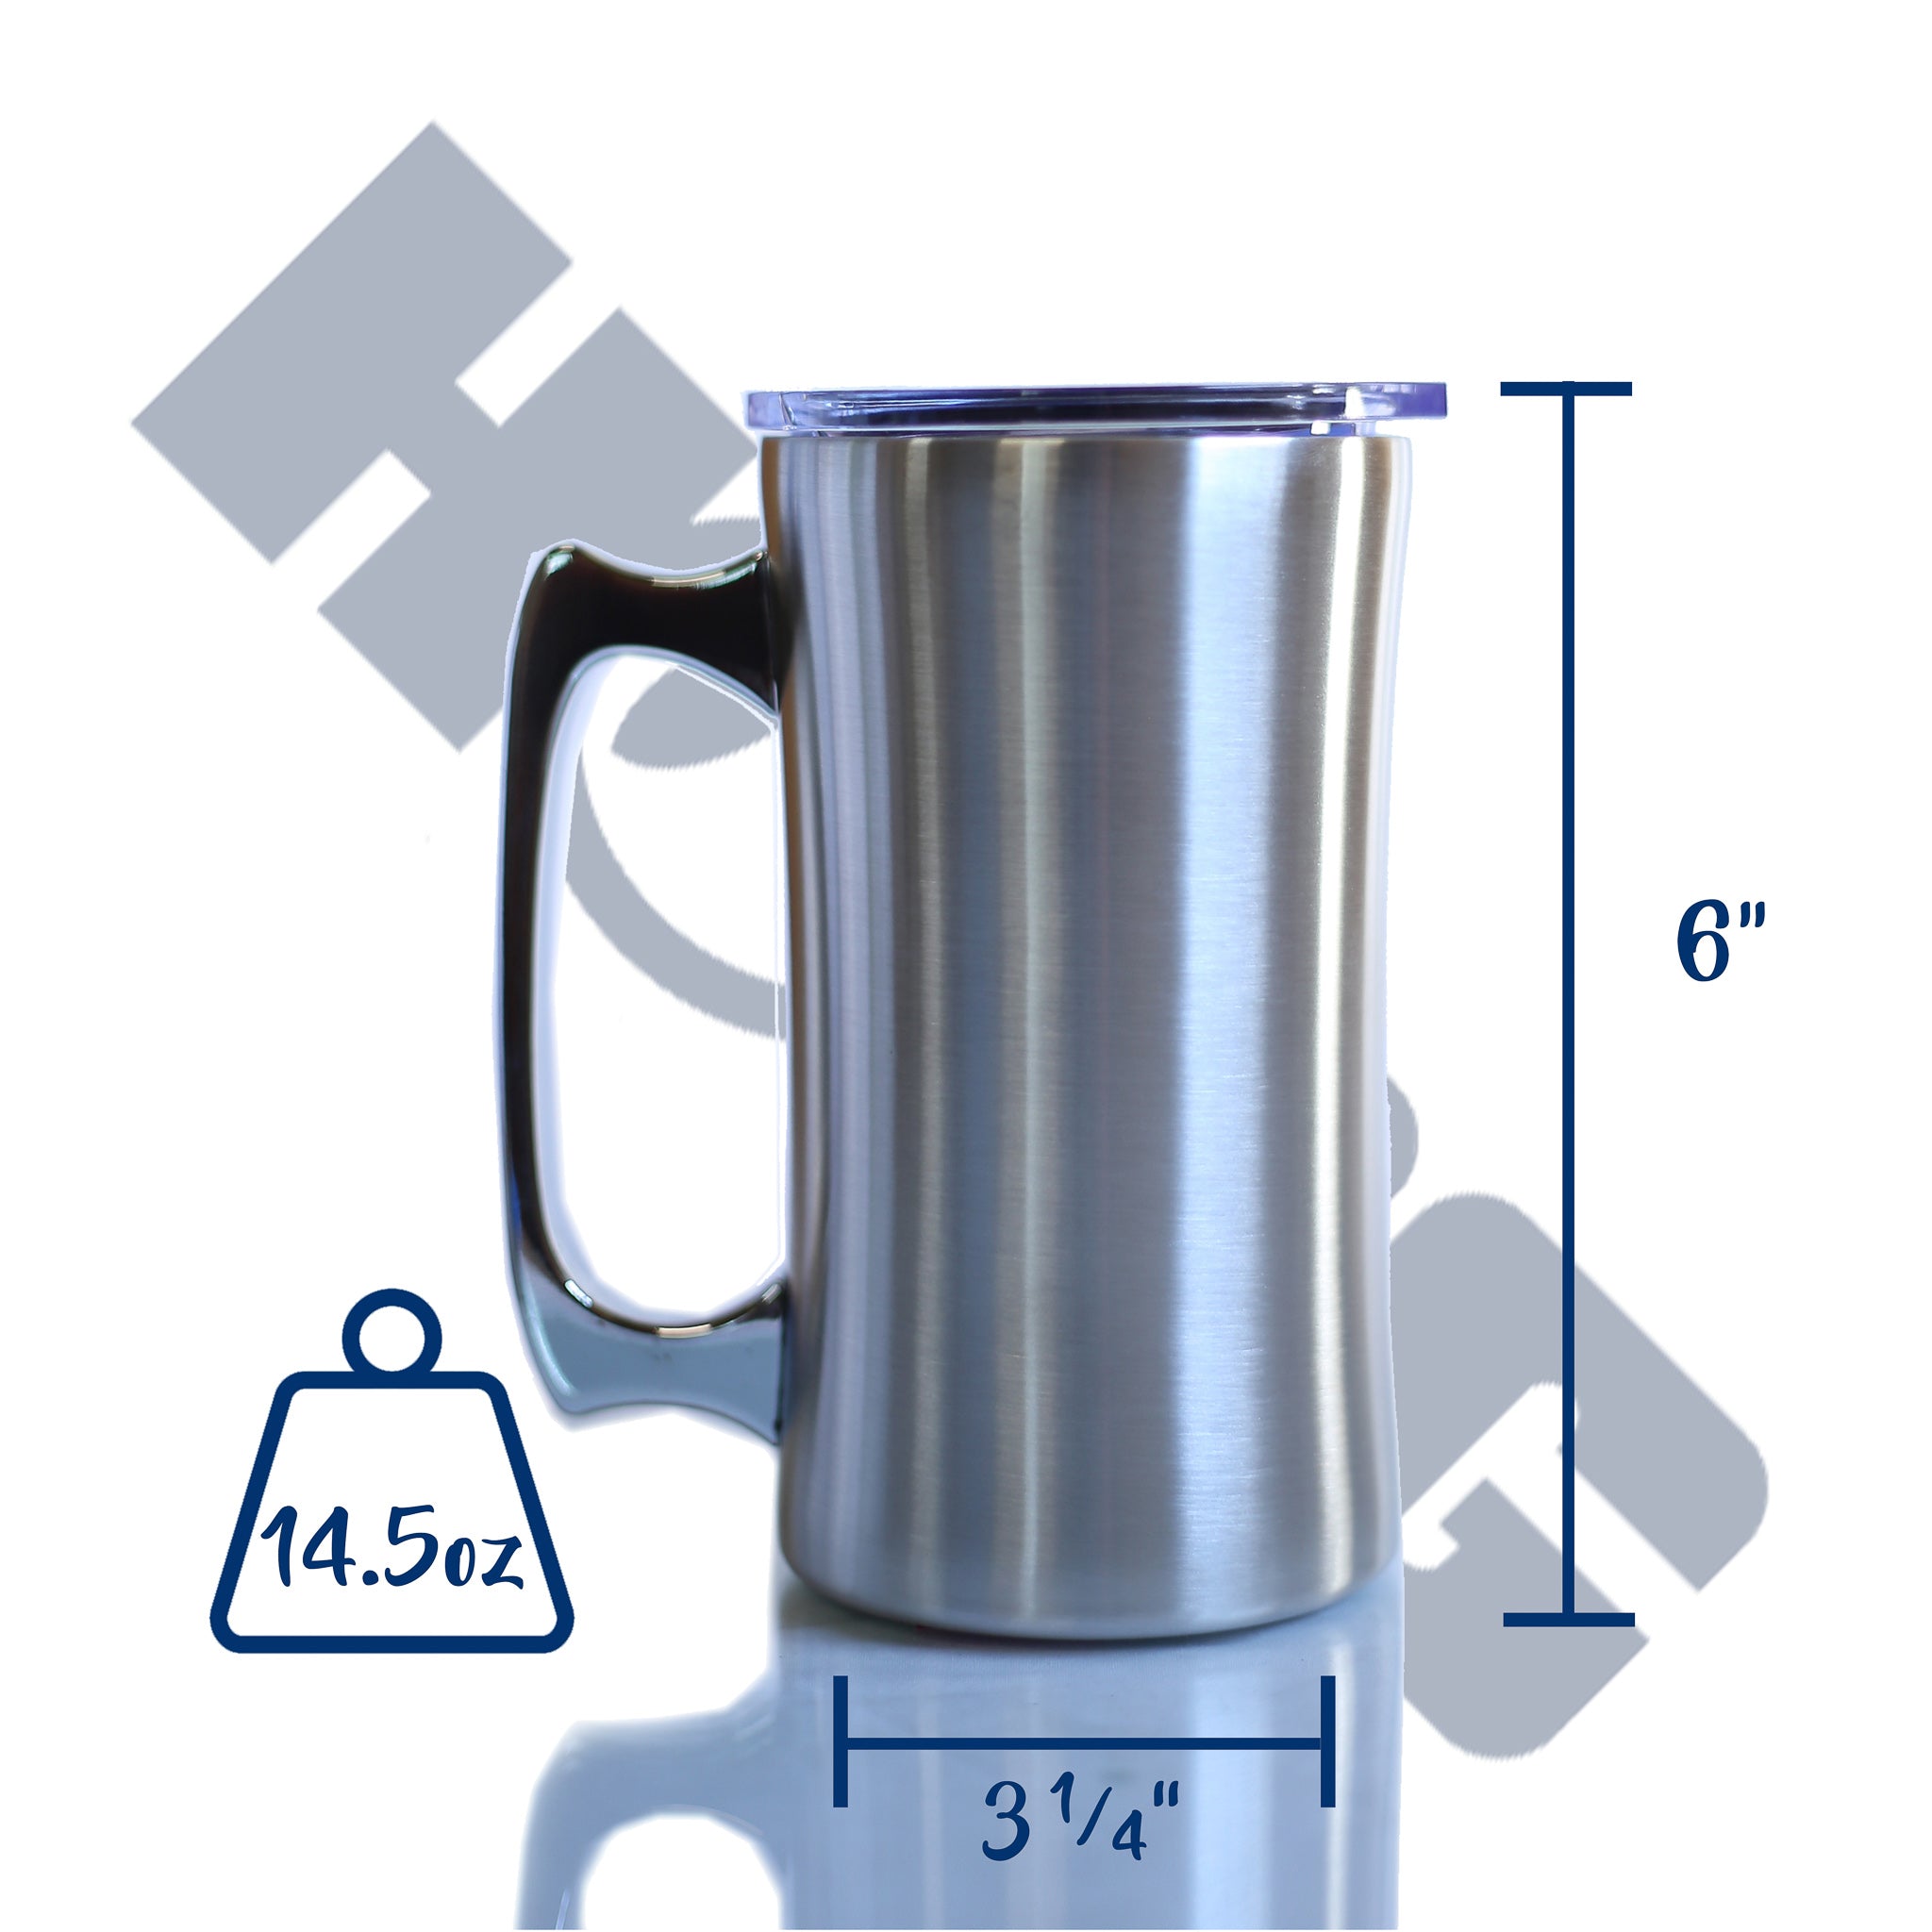 Premium Stainless Steel Custom Stainless Steel Tumblers 20 Oz Bulk Coffee Mug  Cups For Home, Travel, And Christmas Gifts High Quality Beer Glass Mugs  From Darkhorsegoods, $3.99